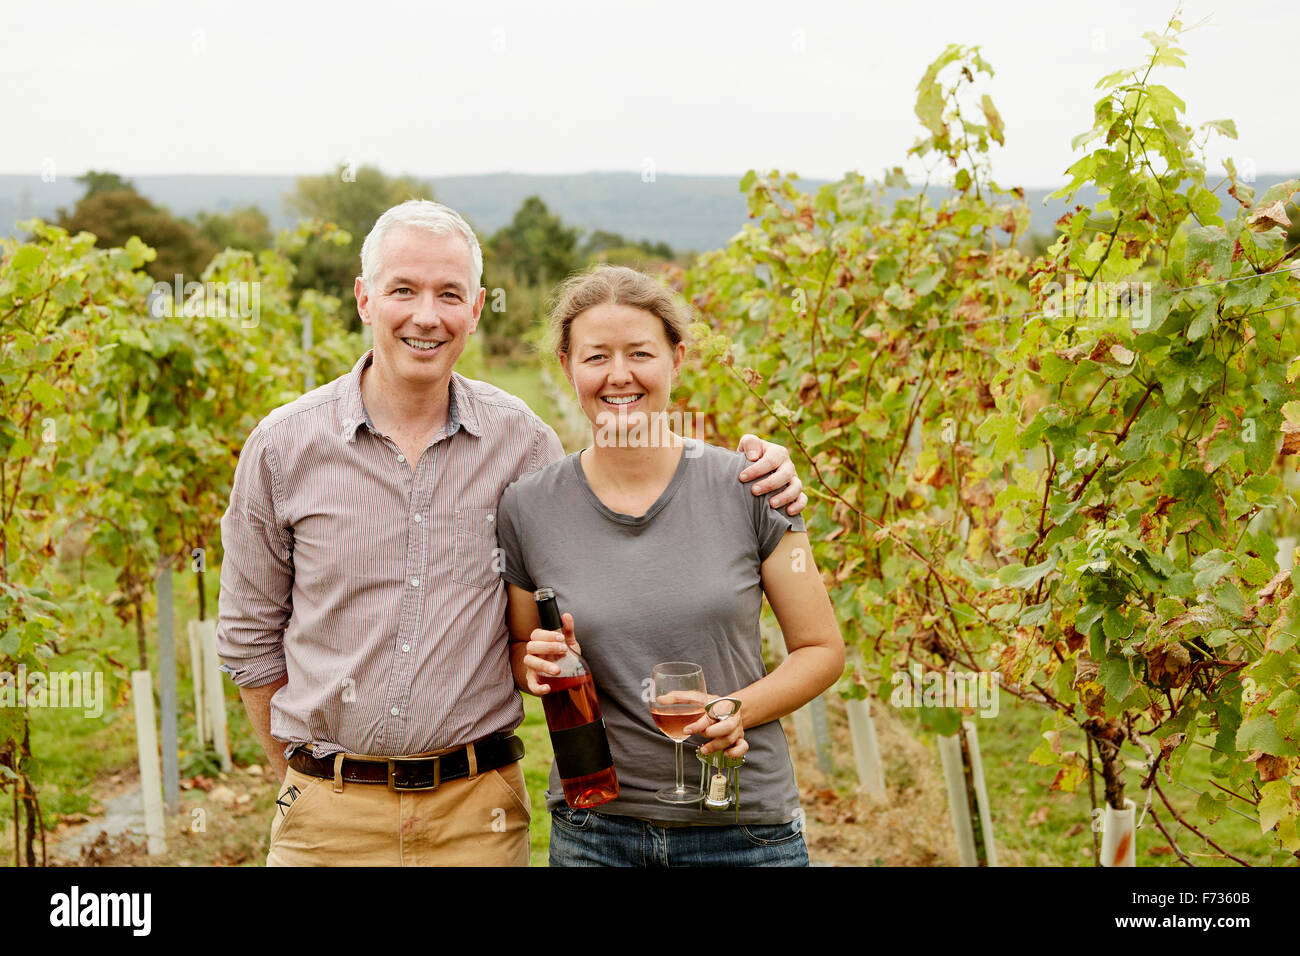 A couple, vineyard founder and her partner standing among the rows of vines. Stock Photo